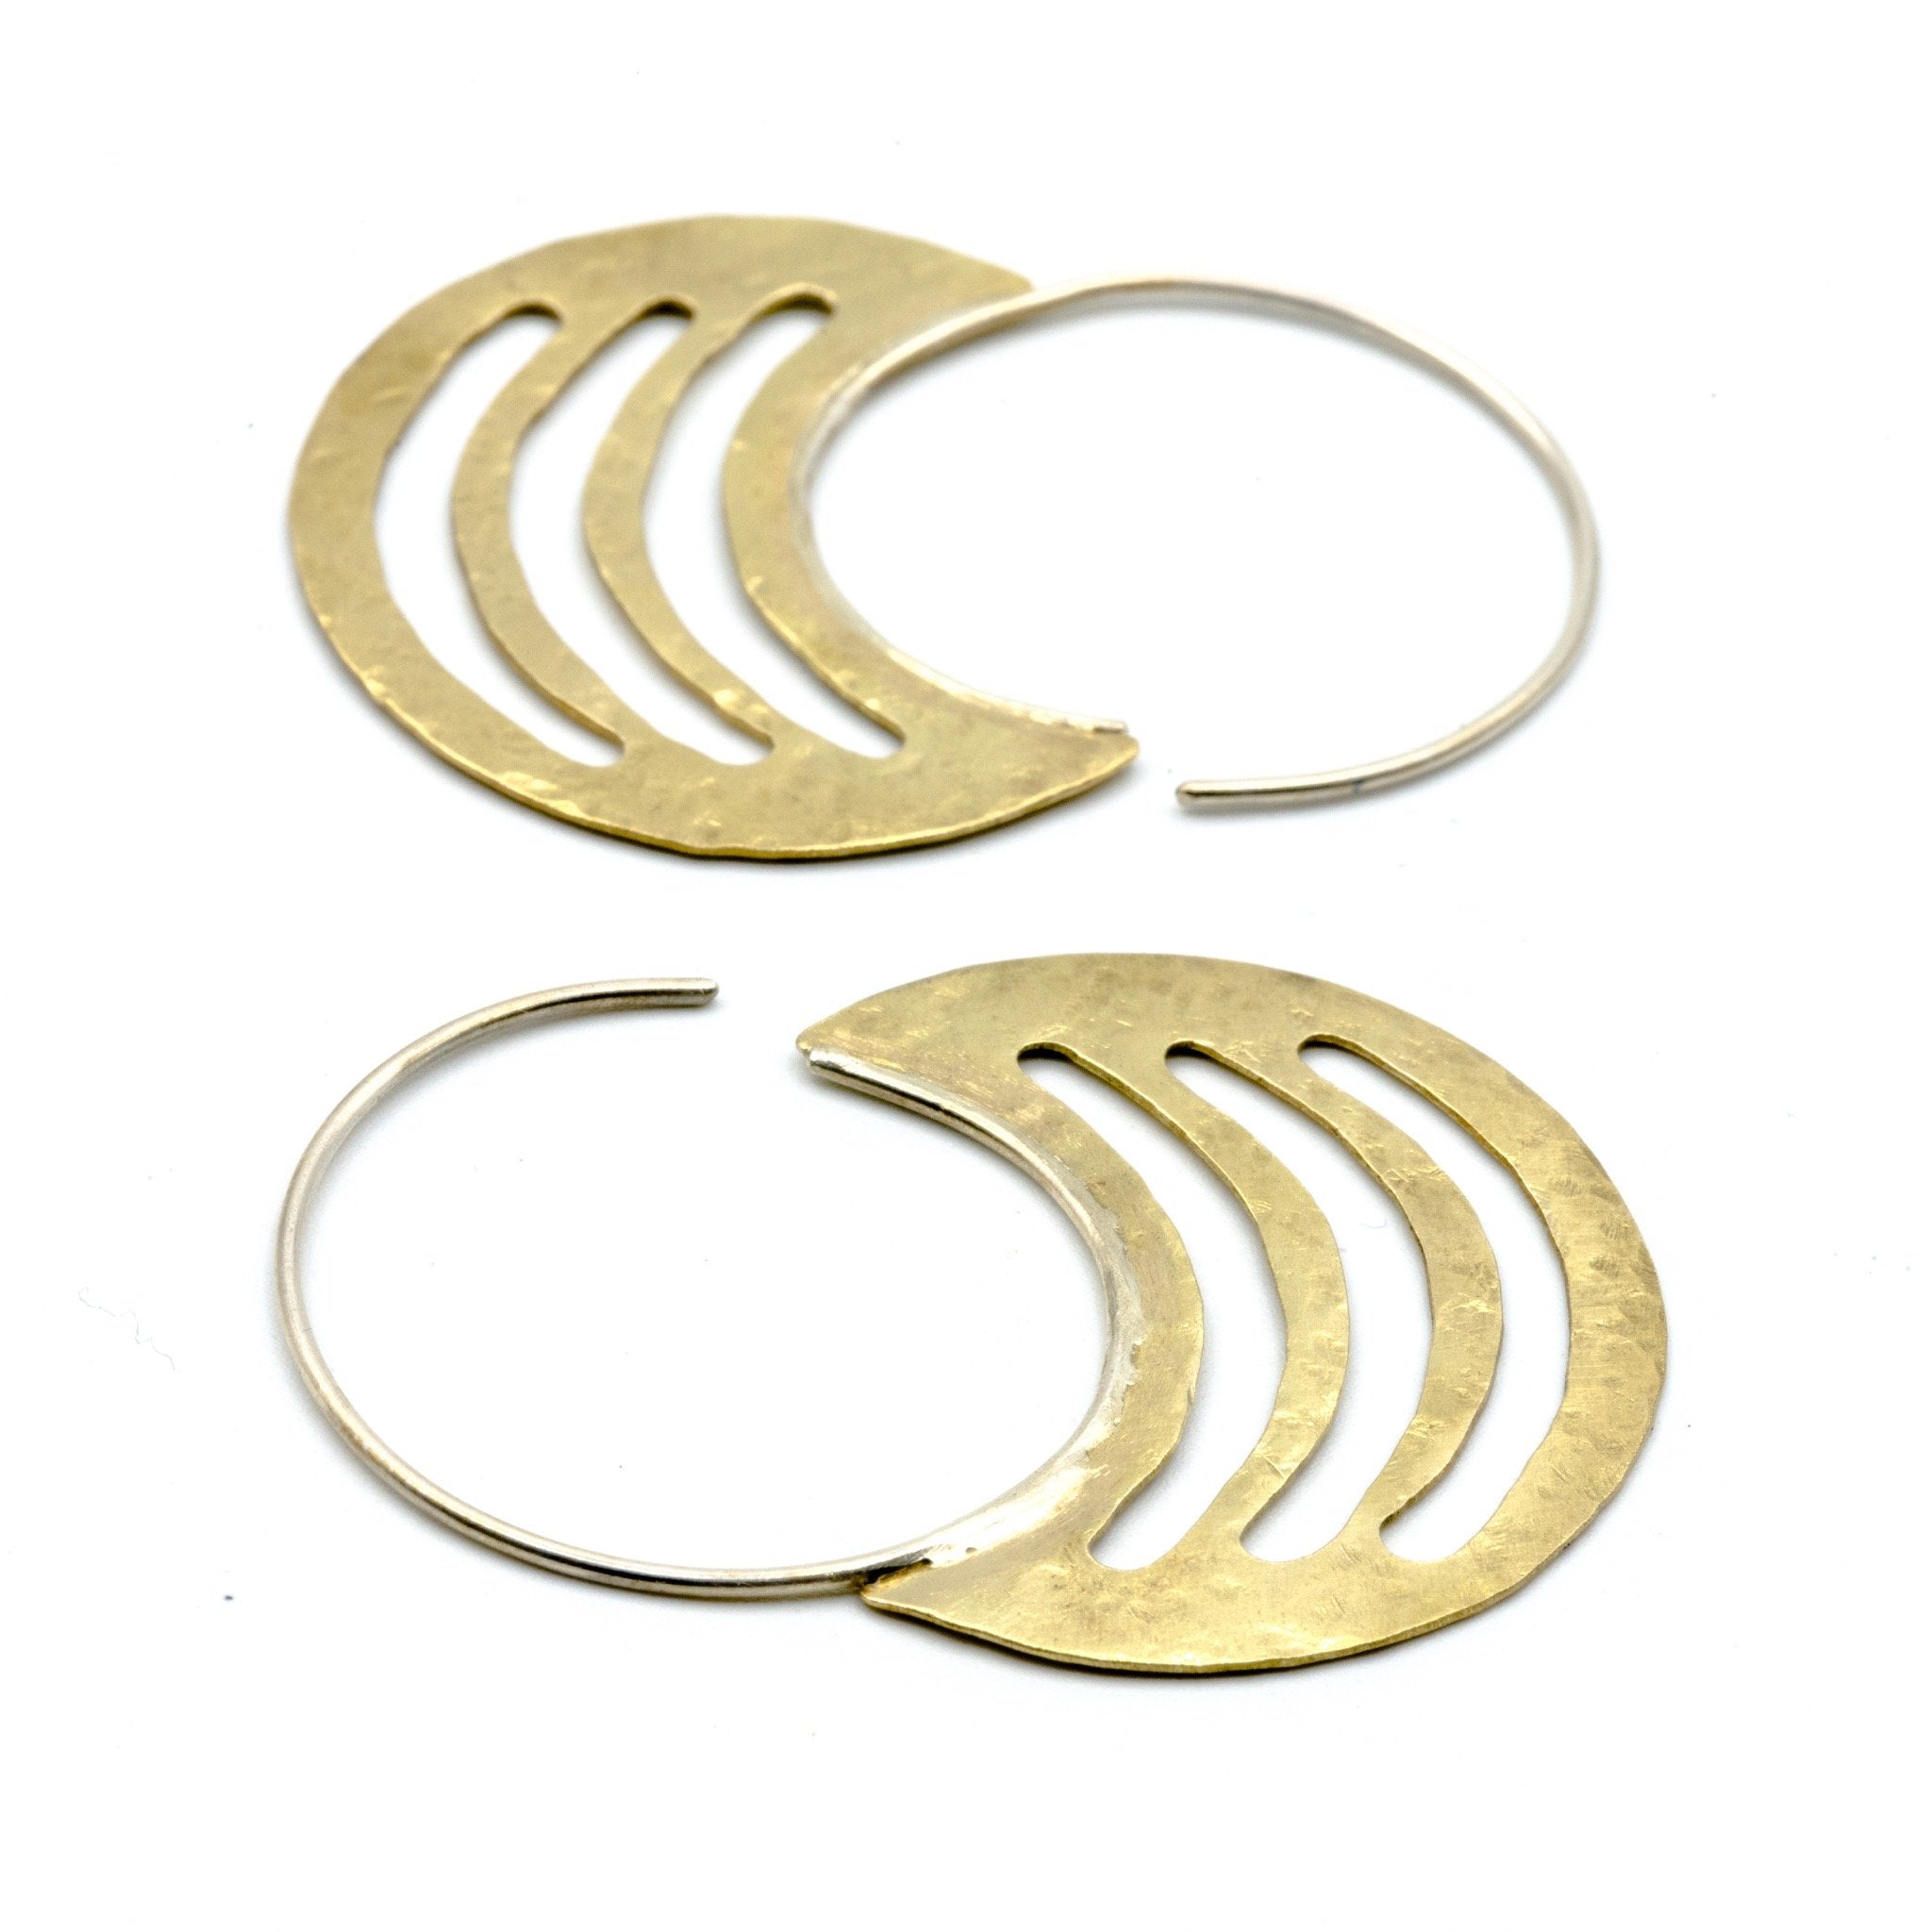 brass sheet earrings with silver hoops on white background